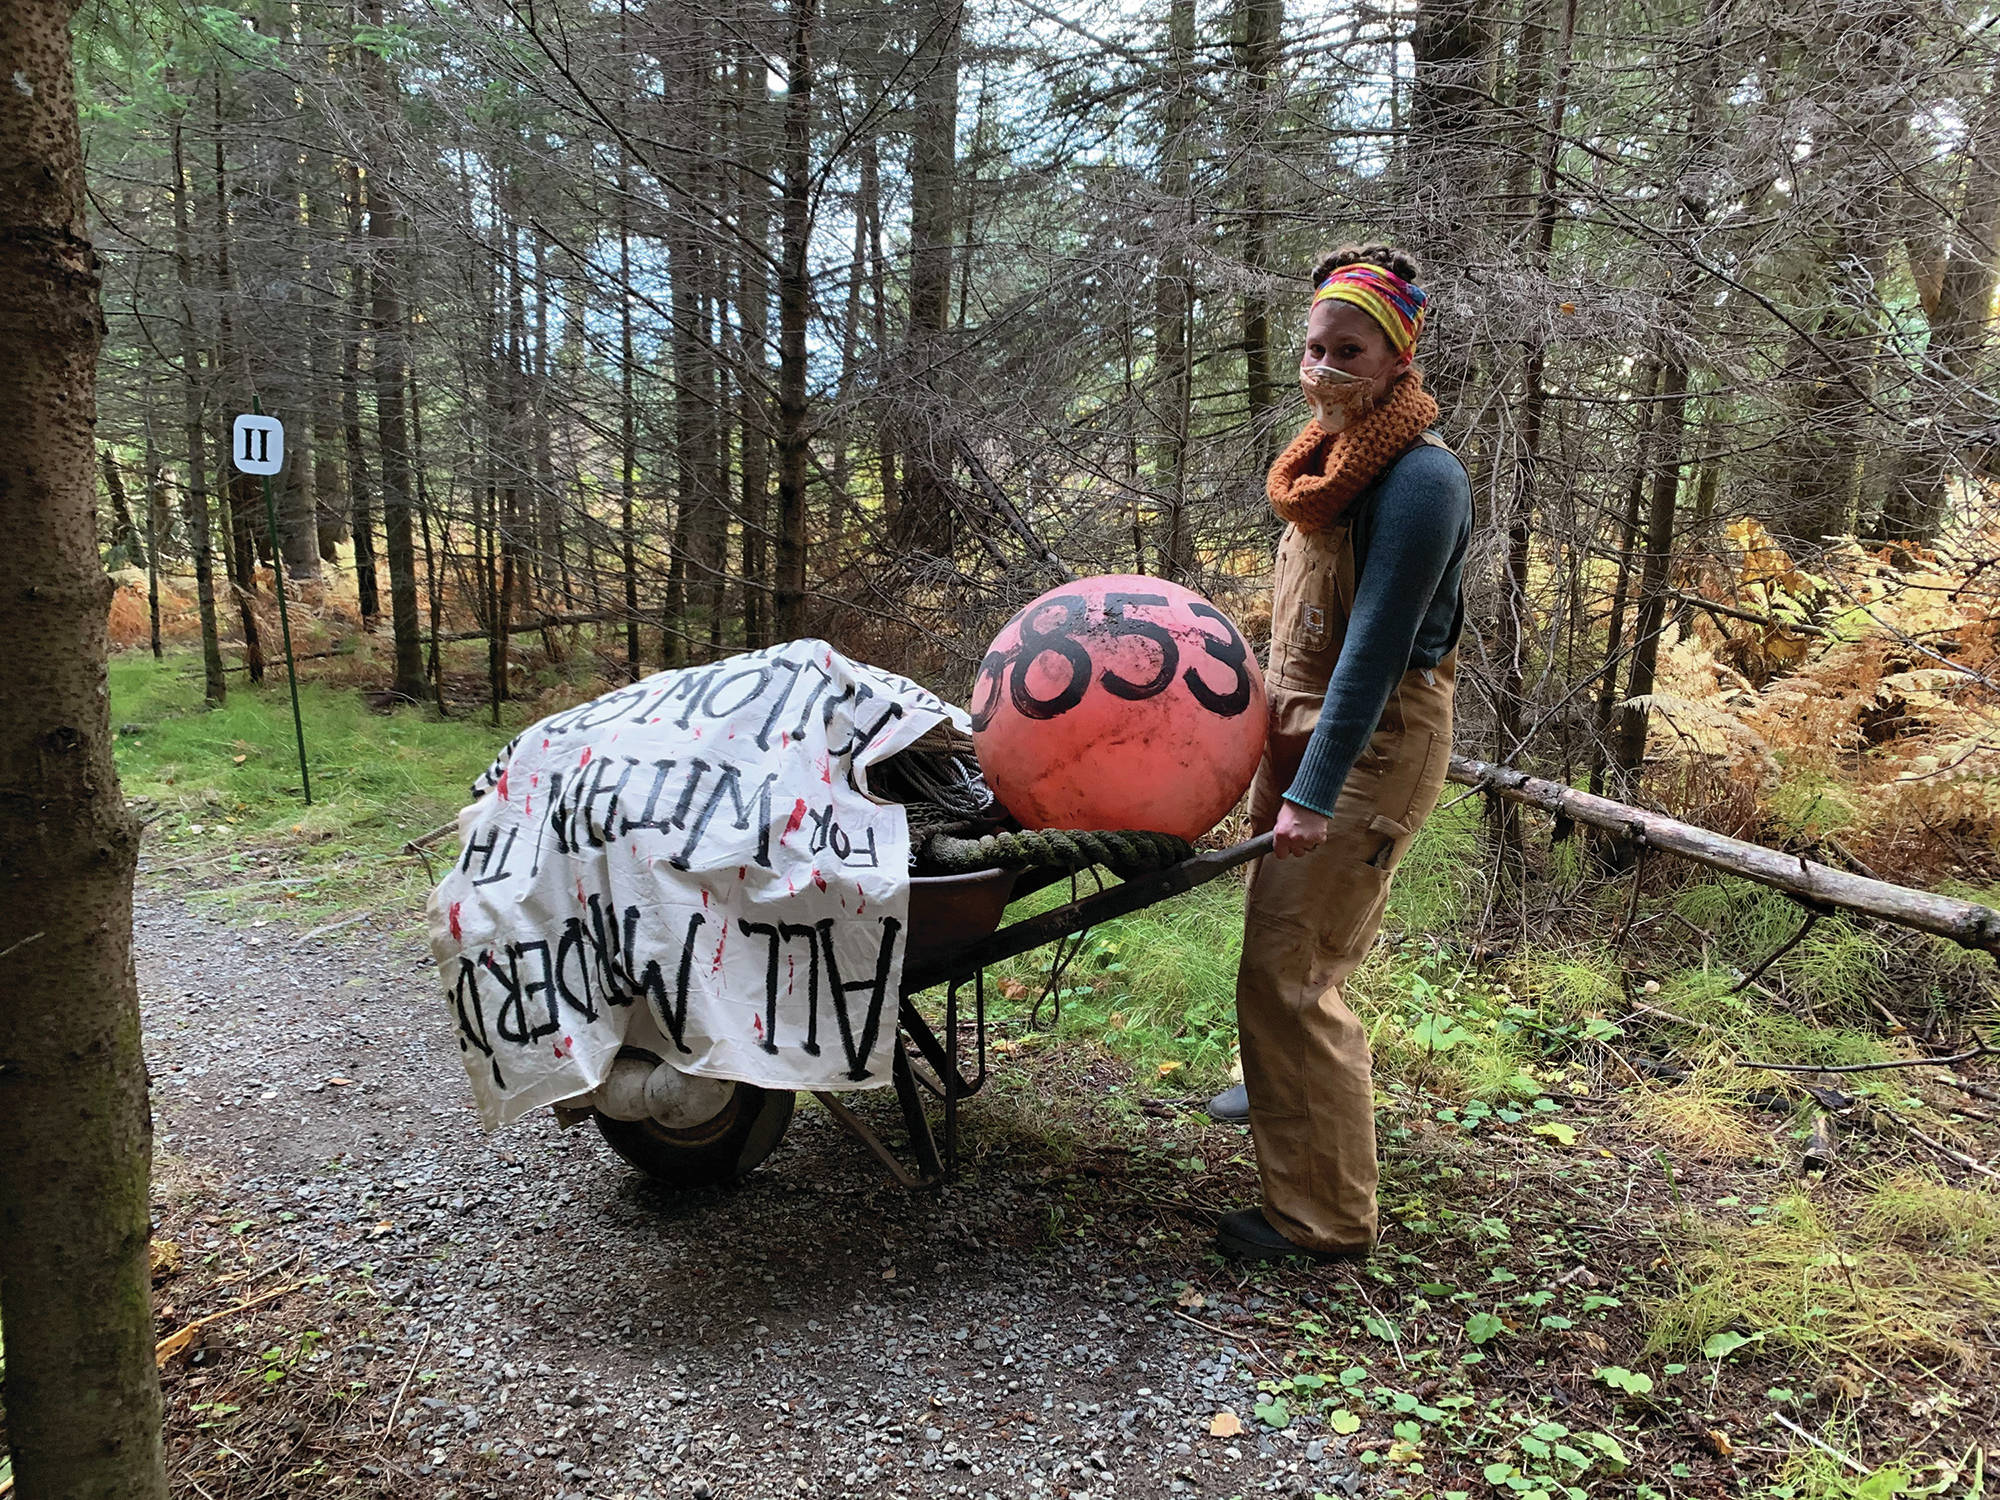 Sarah Brewer moves some props for "Haunted Shakespeare" in a photo taken Oct. 12, 2020, at the Pratt Museum forest trail in Homer, Alaska. Brewer is the curator and director of the evening of theater. (Photo courtesy Pier One Theatre)